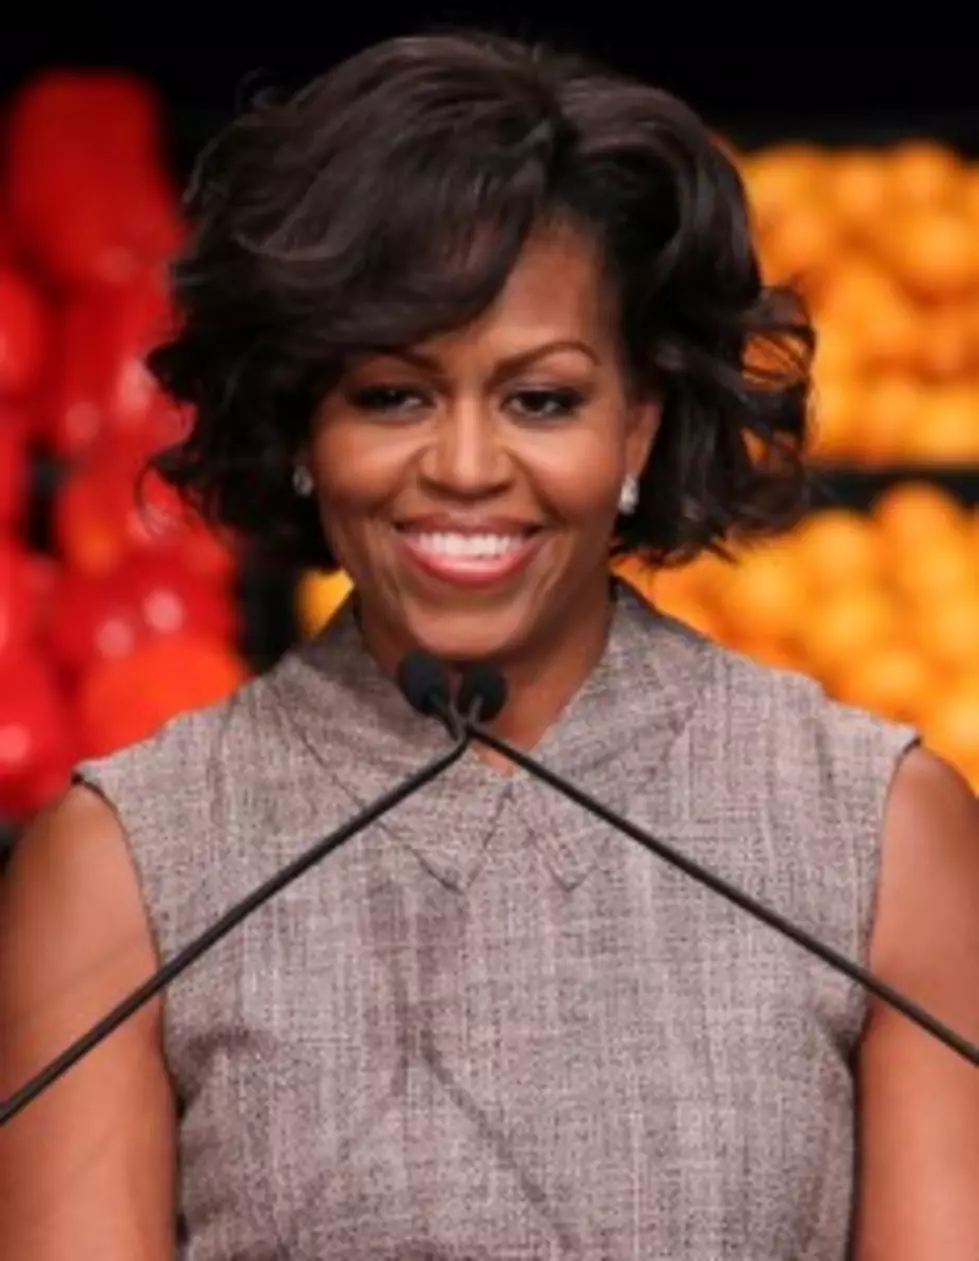 Michelle Obama: First Lady With Fashion